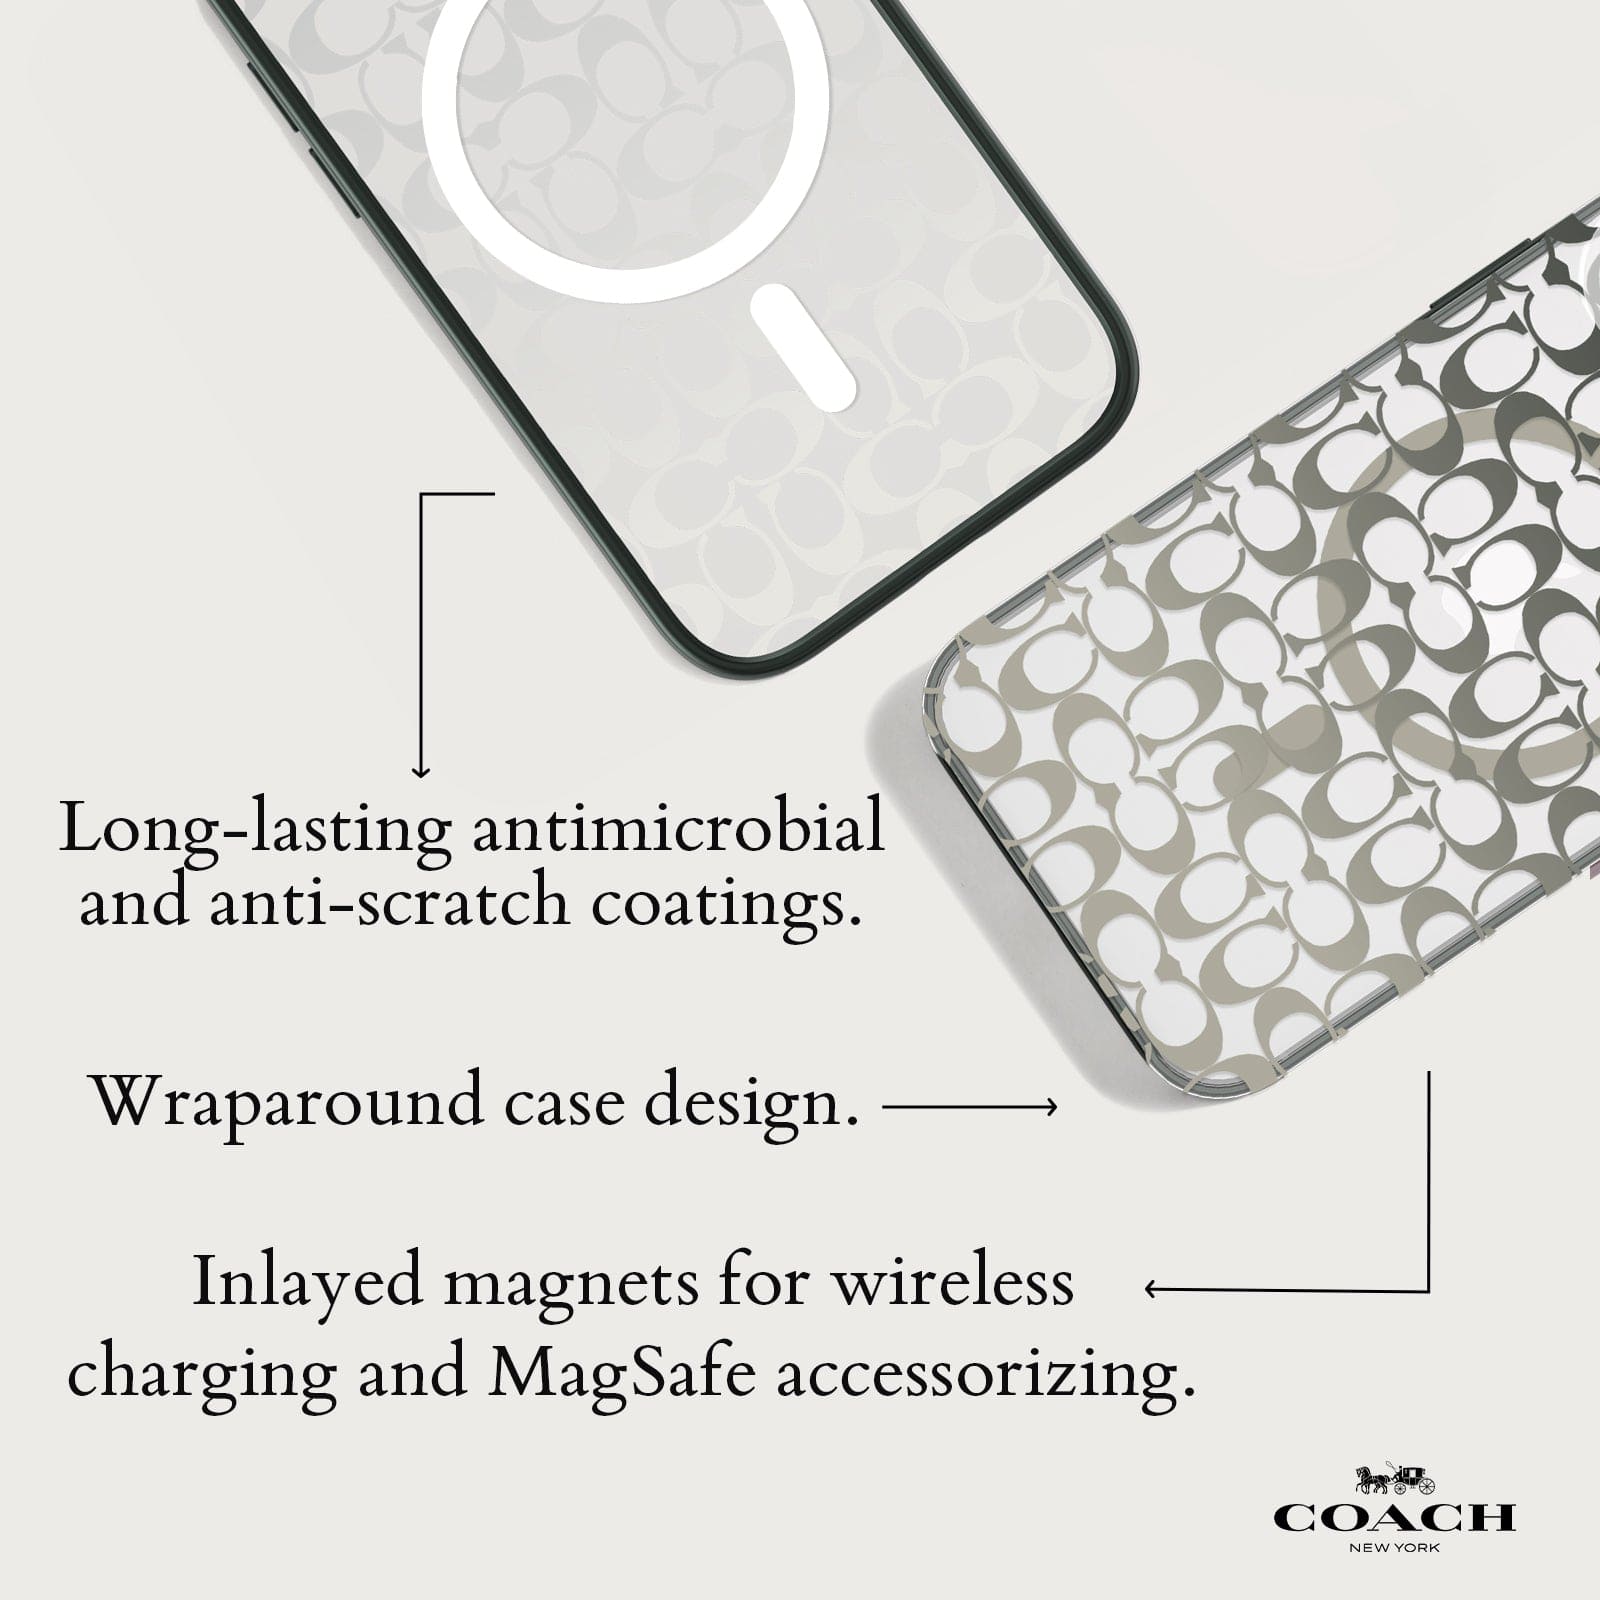 LONG-LASTING ANTIMICROBIAL AND ANTI-SCRATCH COATINGS. WRAPAROUND CASE DESIGN. INLAYED MAGNETS FOR WIRELESS CHARGING AND MAGSAFE ACCESSORIZING.